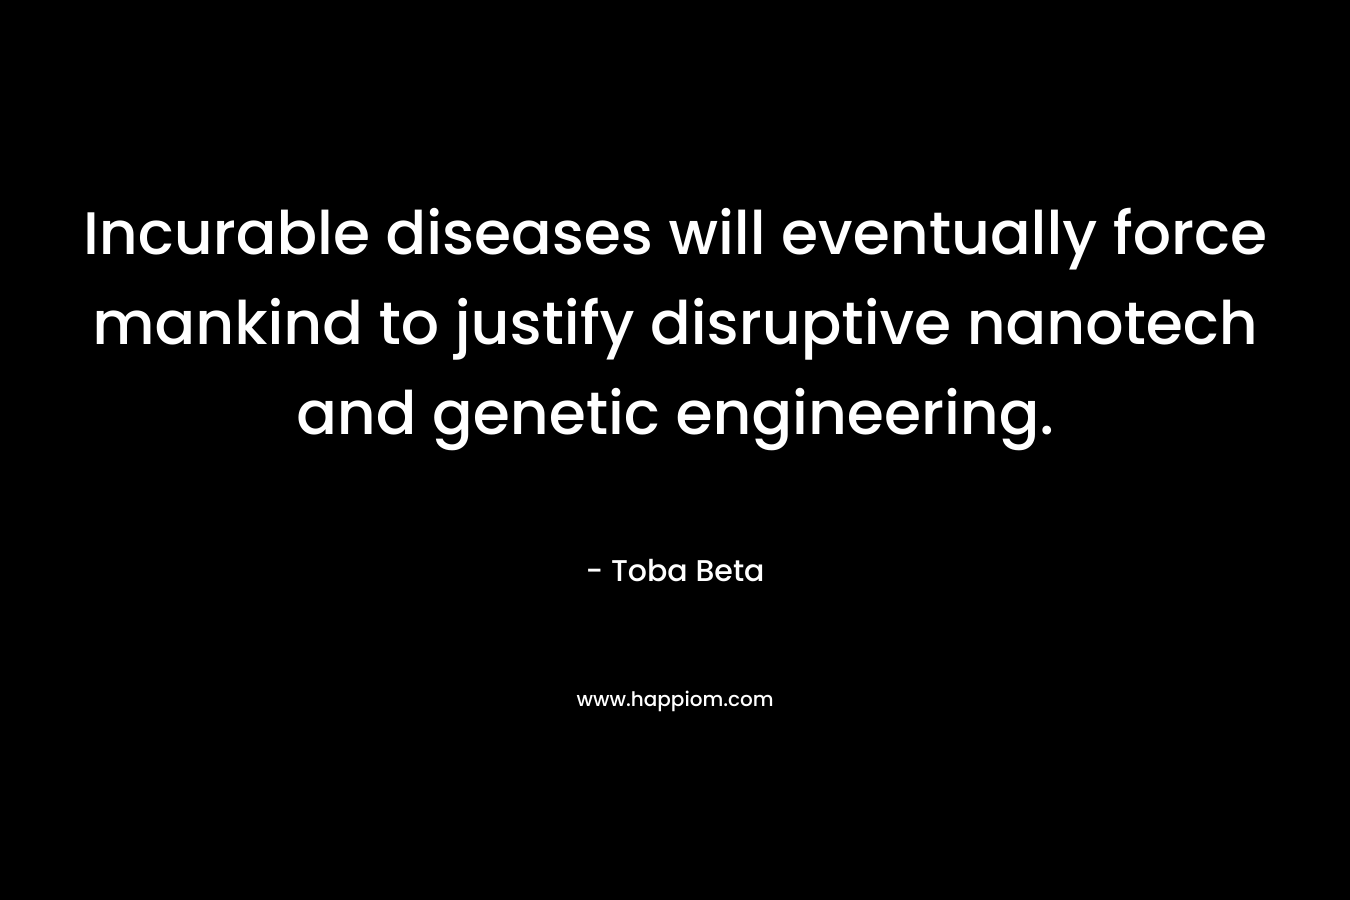 Incurable diseases will eventually force mankind to justify disruptive nanotech and genetic engineering. – Toba Beta